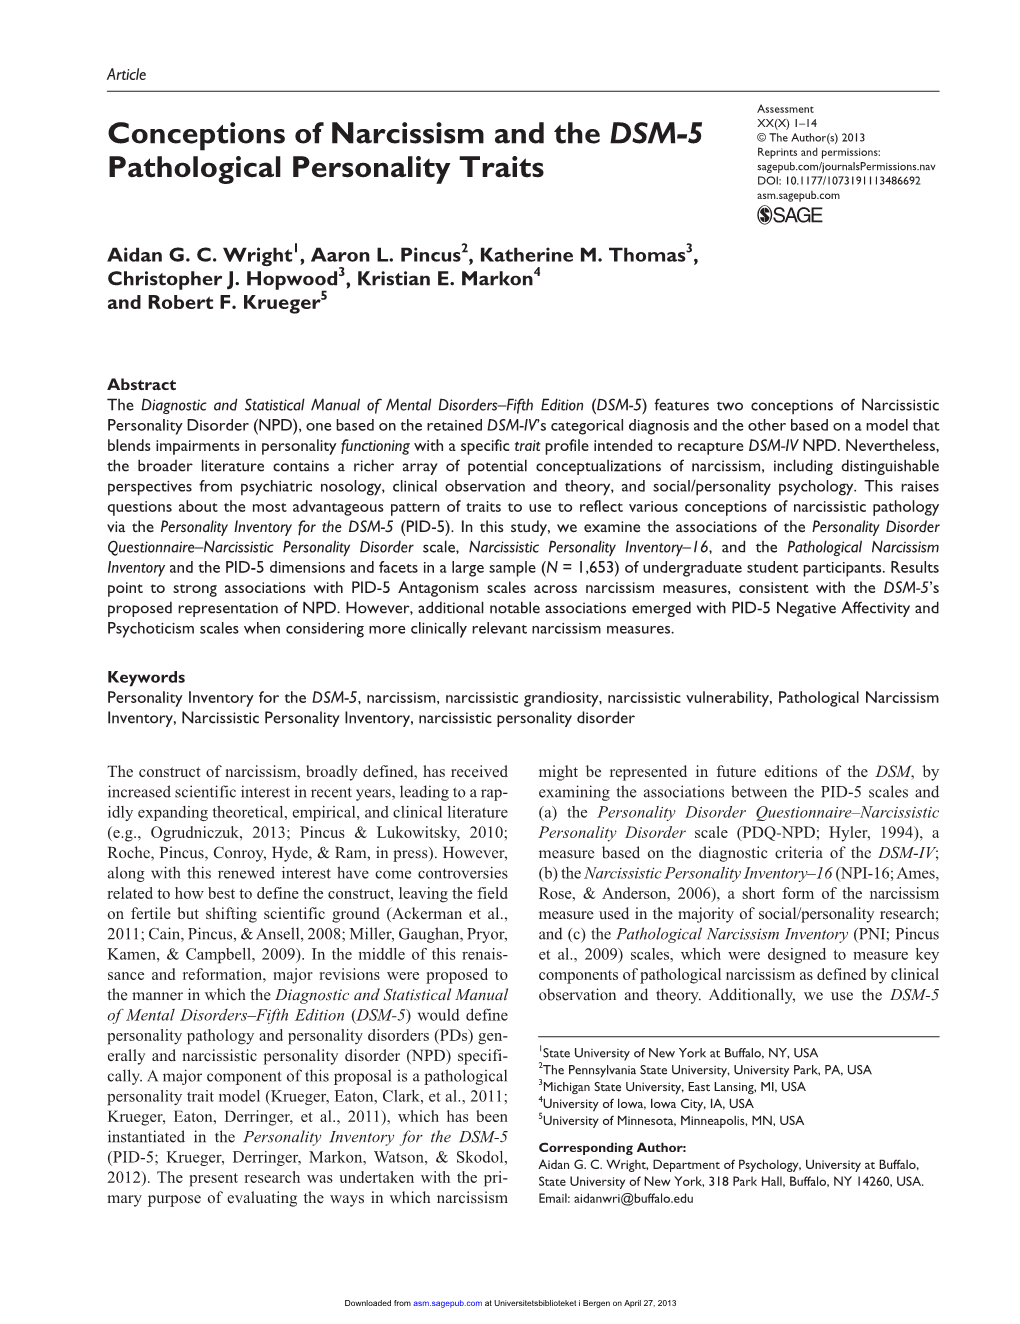 Conceptions of Narcissism and the DSM-5 Pathological Personality Traits